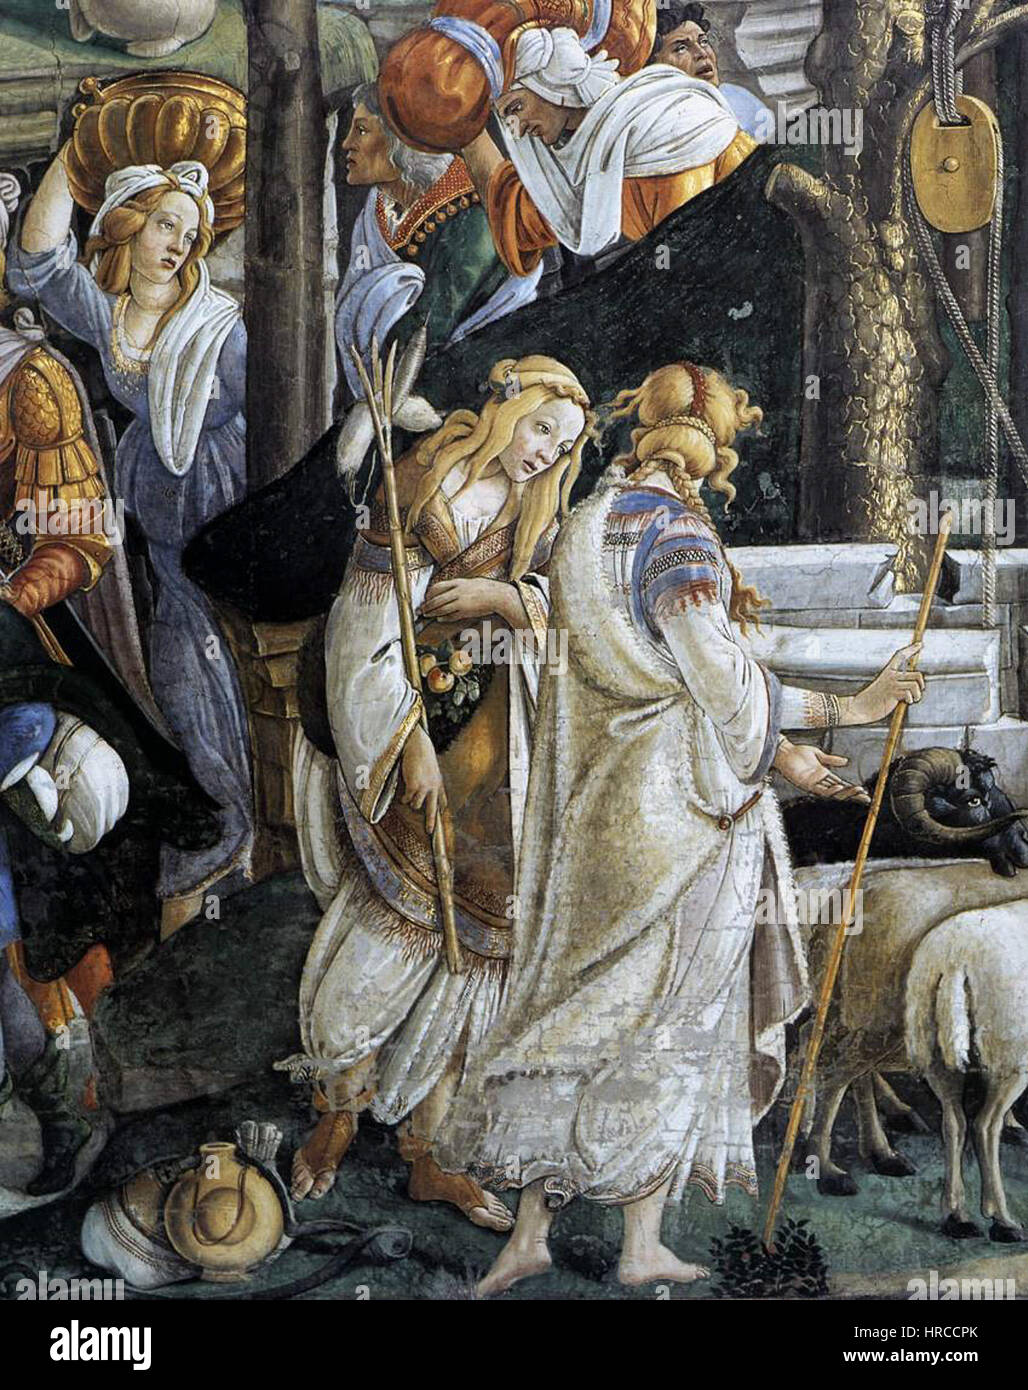 Sandro Botticelli - The Trials and Calling of Moses (detail) - WGA2740 Stock Photo